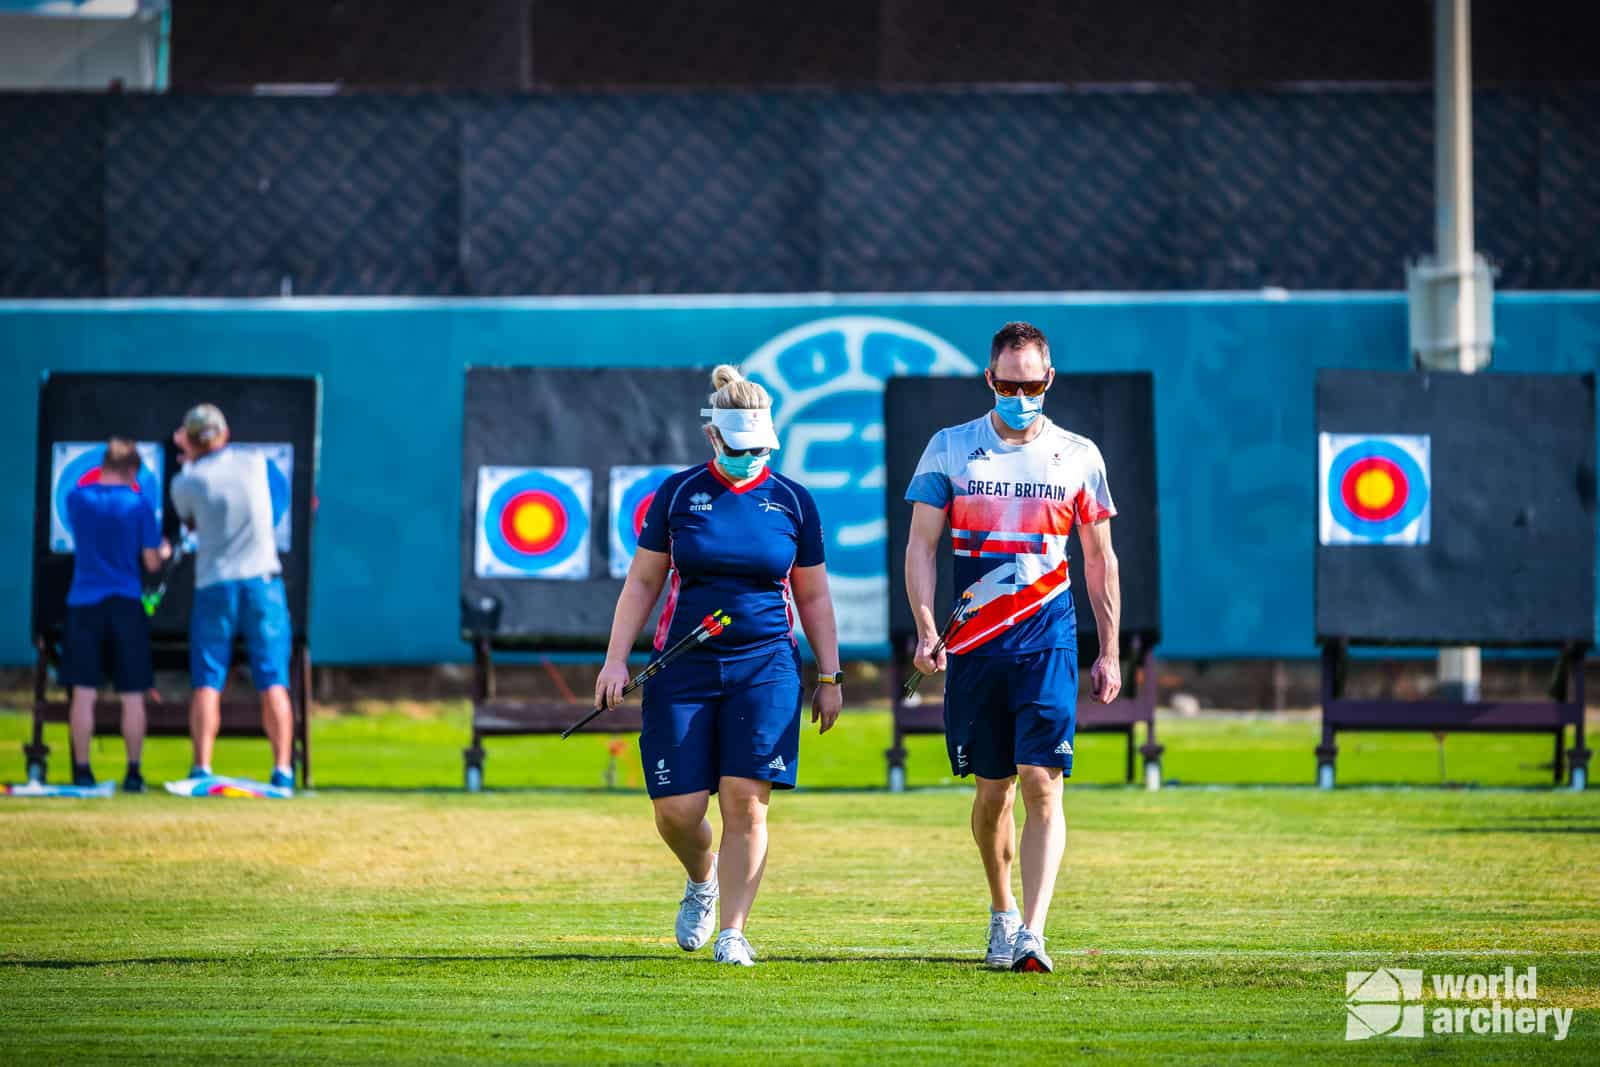 Archery GB to expand coaching team ahead of Paris Games